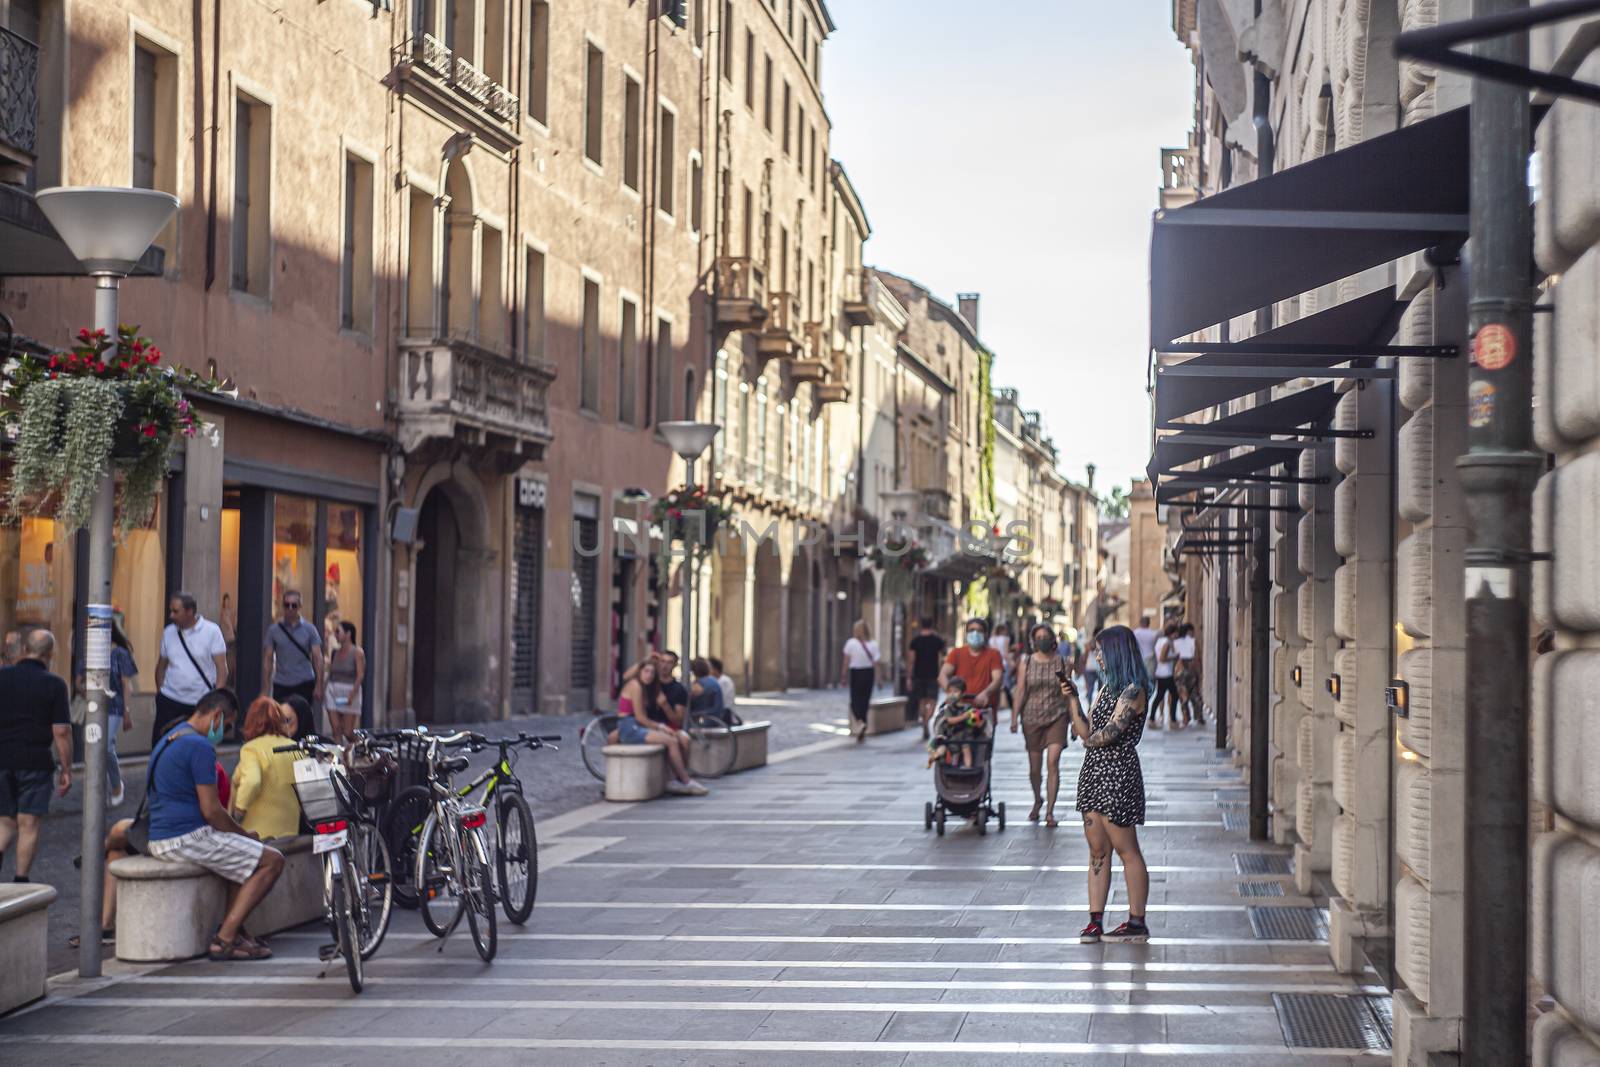 PADOVA, ITALY 17 JULY 2020: Real life scene in Padua street with people